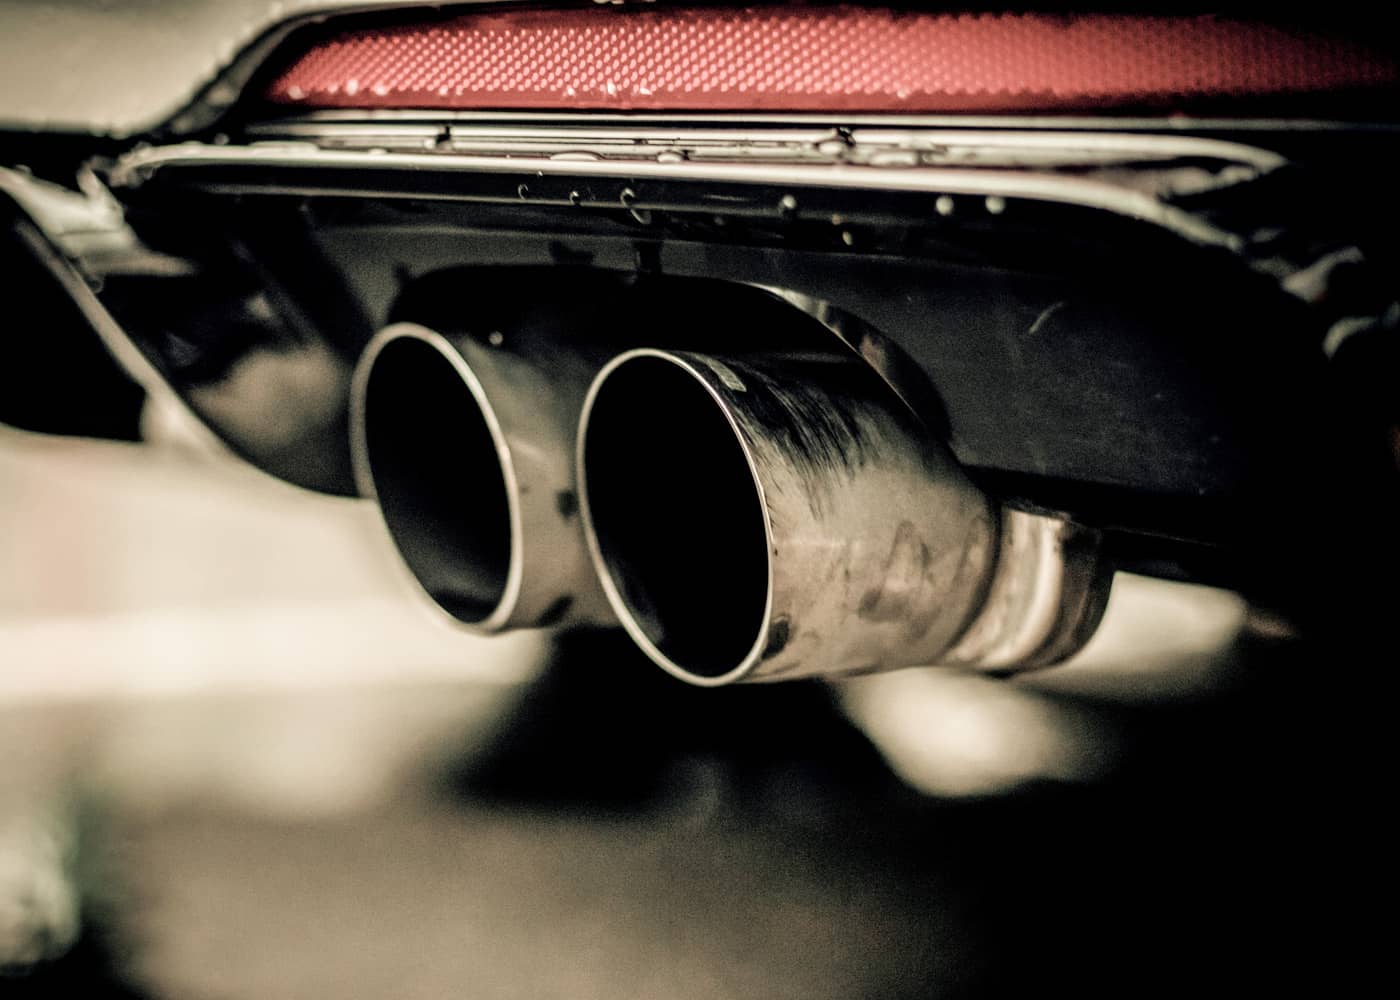 Exhaust system carbon tax